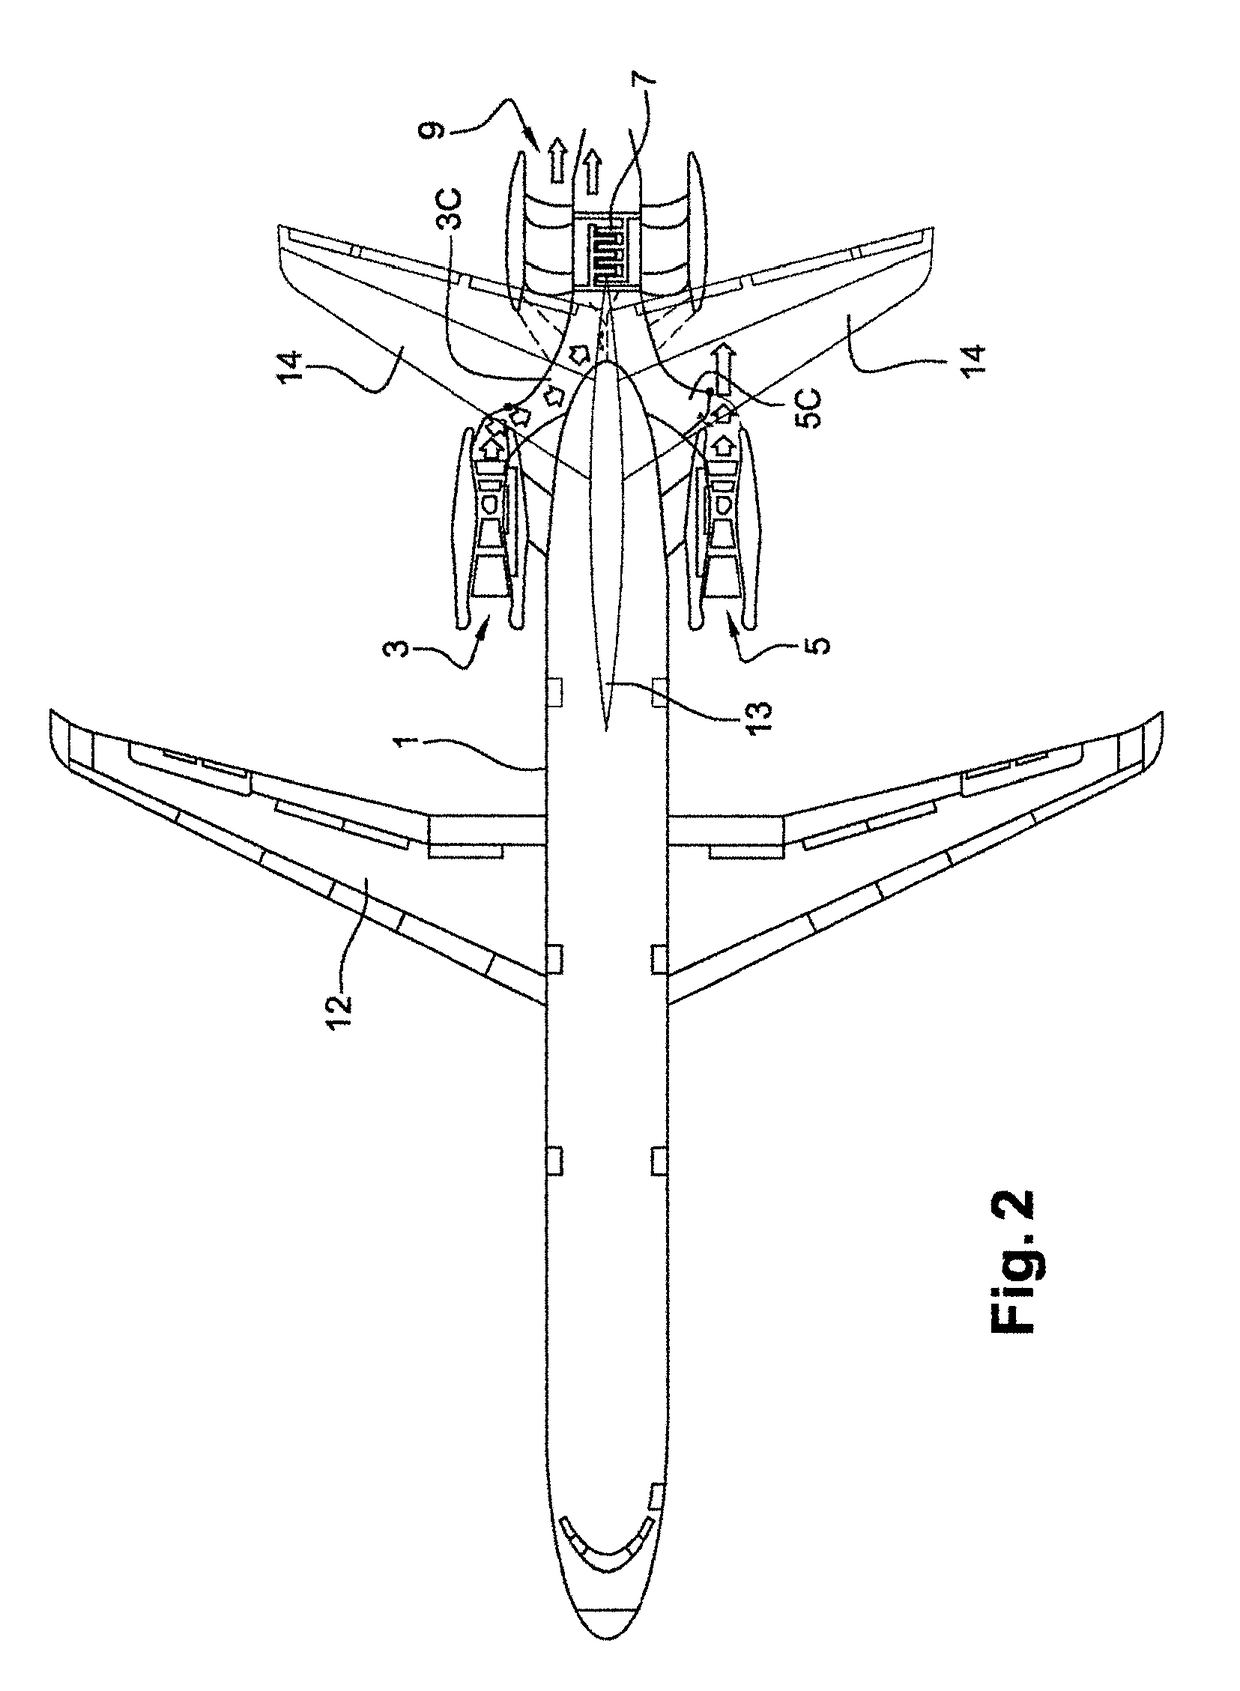 Aircraft comprising  a propulsion assembly including a fan on the rear of the fuselage